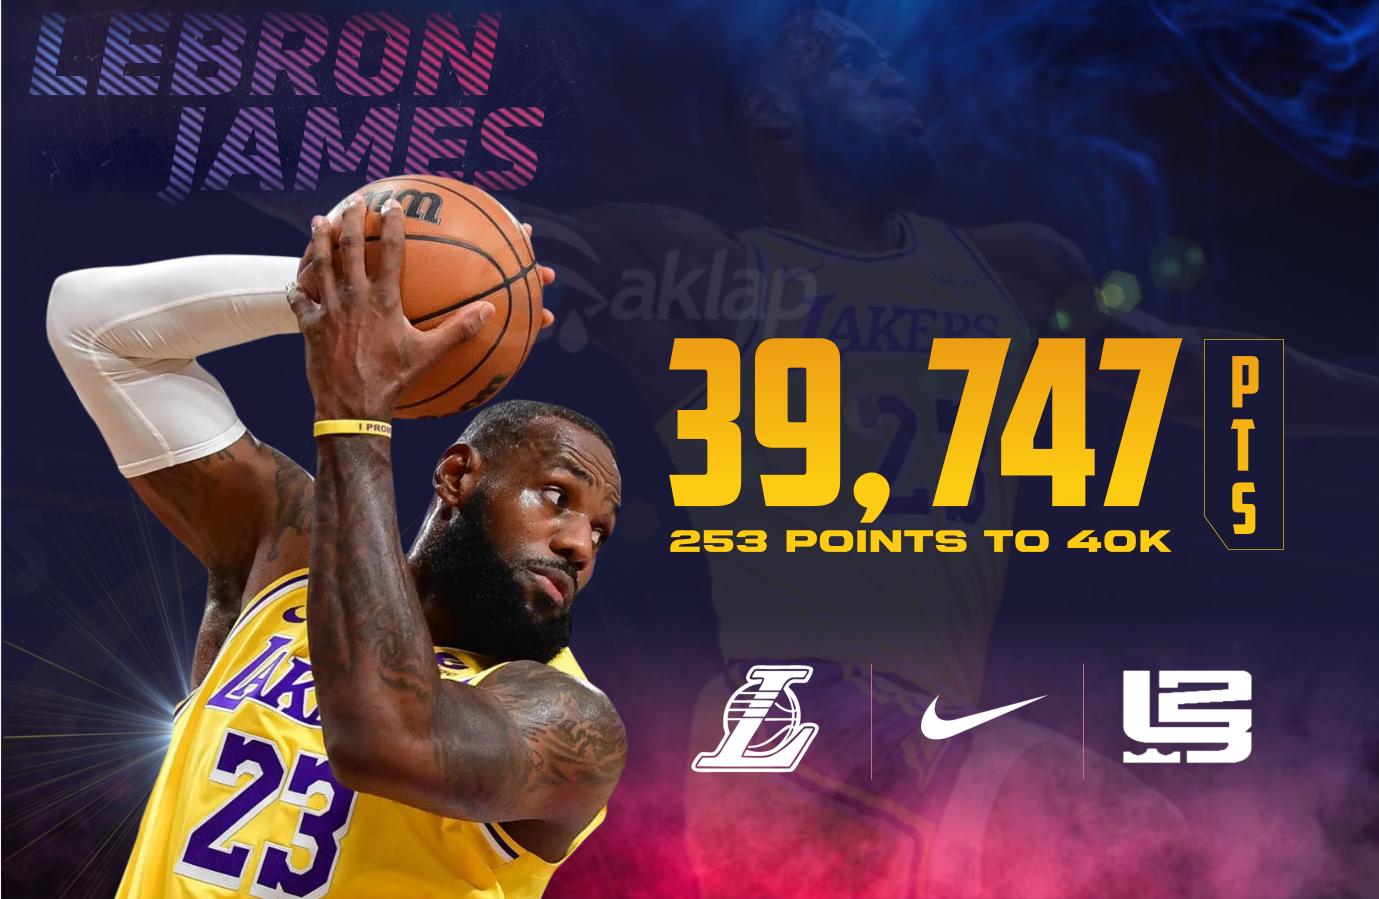 Tracking LeBron James hitting 40,000 point-mark, LeBron James becomes the first NBA player to reach 39,000 points, Tracking LeBron James Path reaching 40,000 point-mark